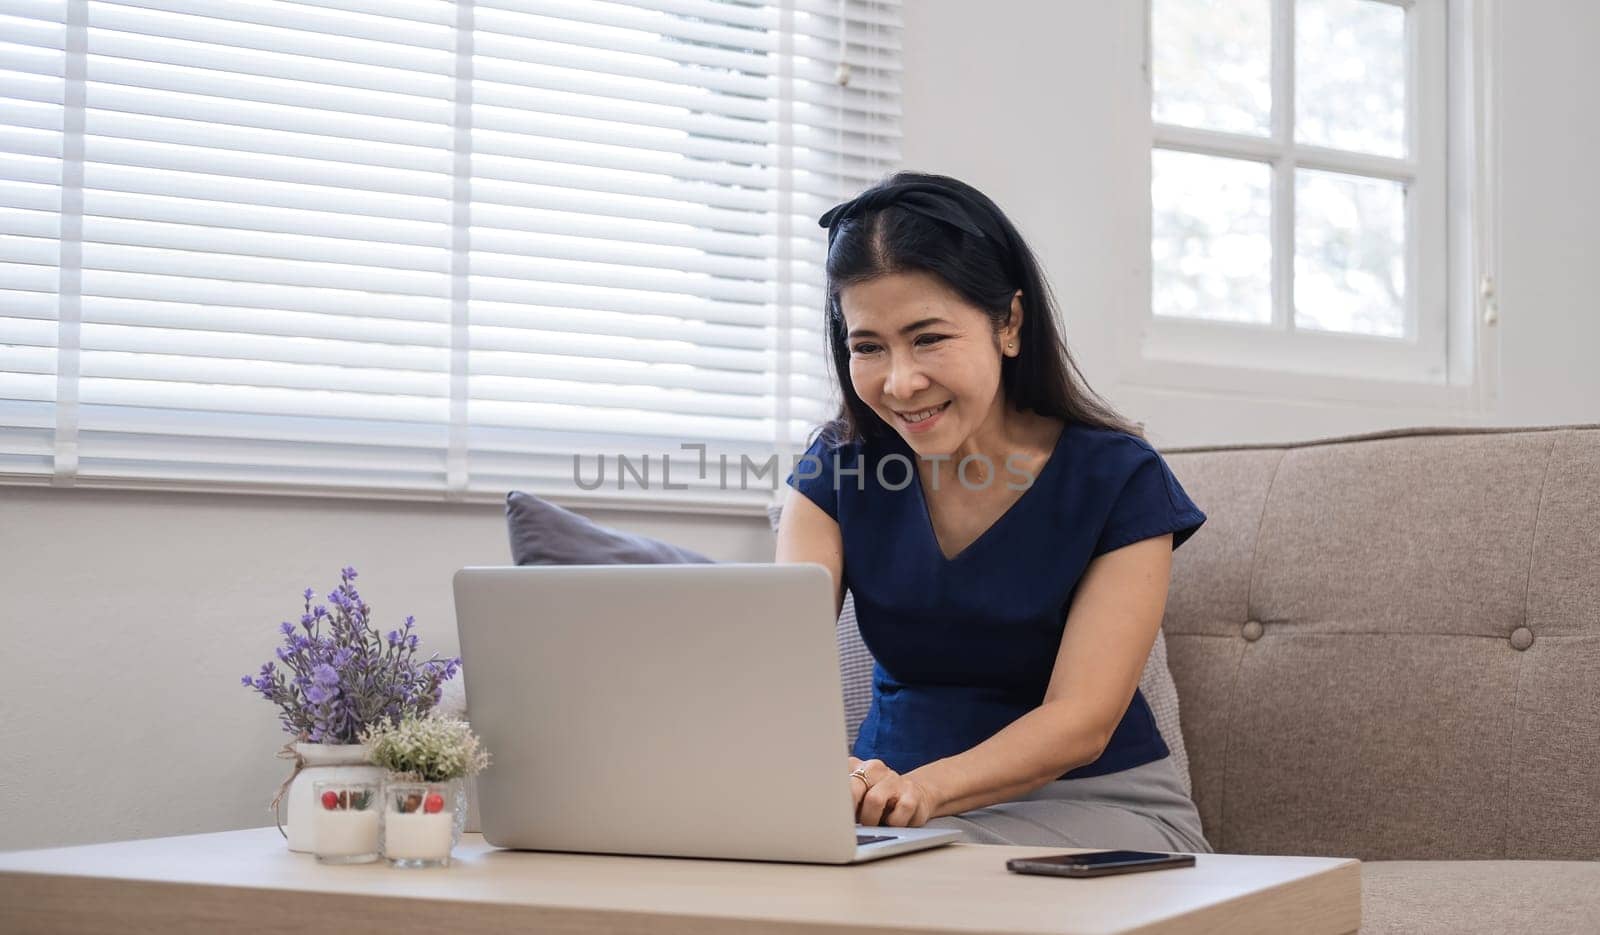 Happy Asian retired woman in her 60's enjoying social media on laptop while relaxing in living room..